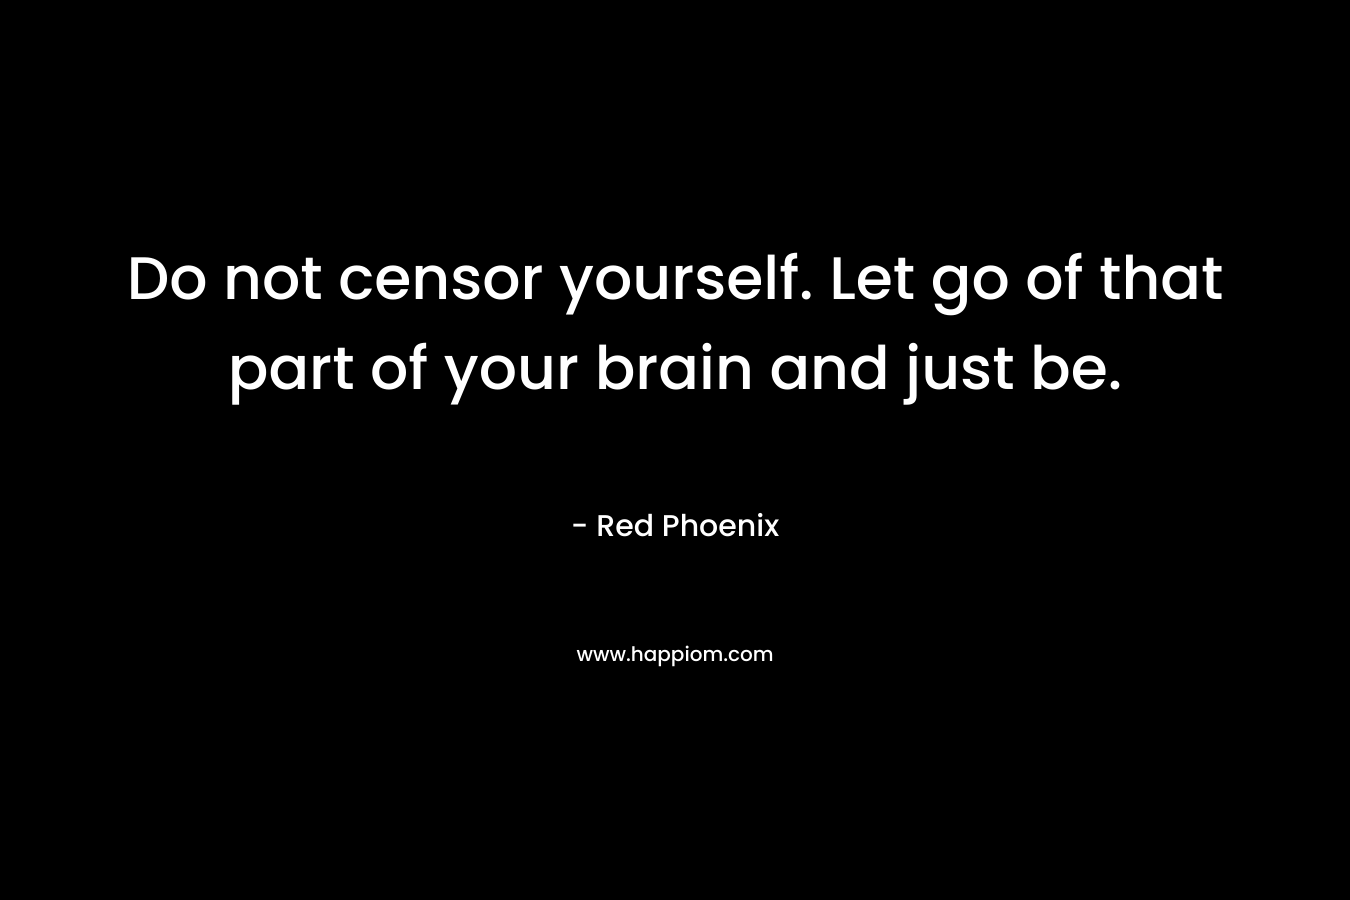 Do not censor yourself. Let go of that part of your brain and just be. – Red Phoenix